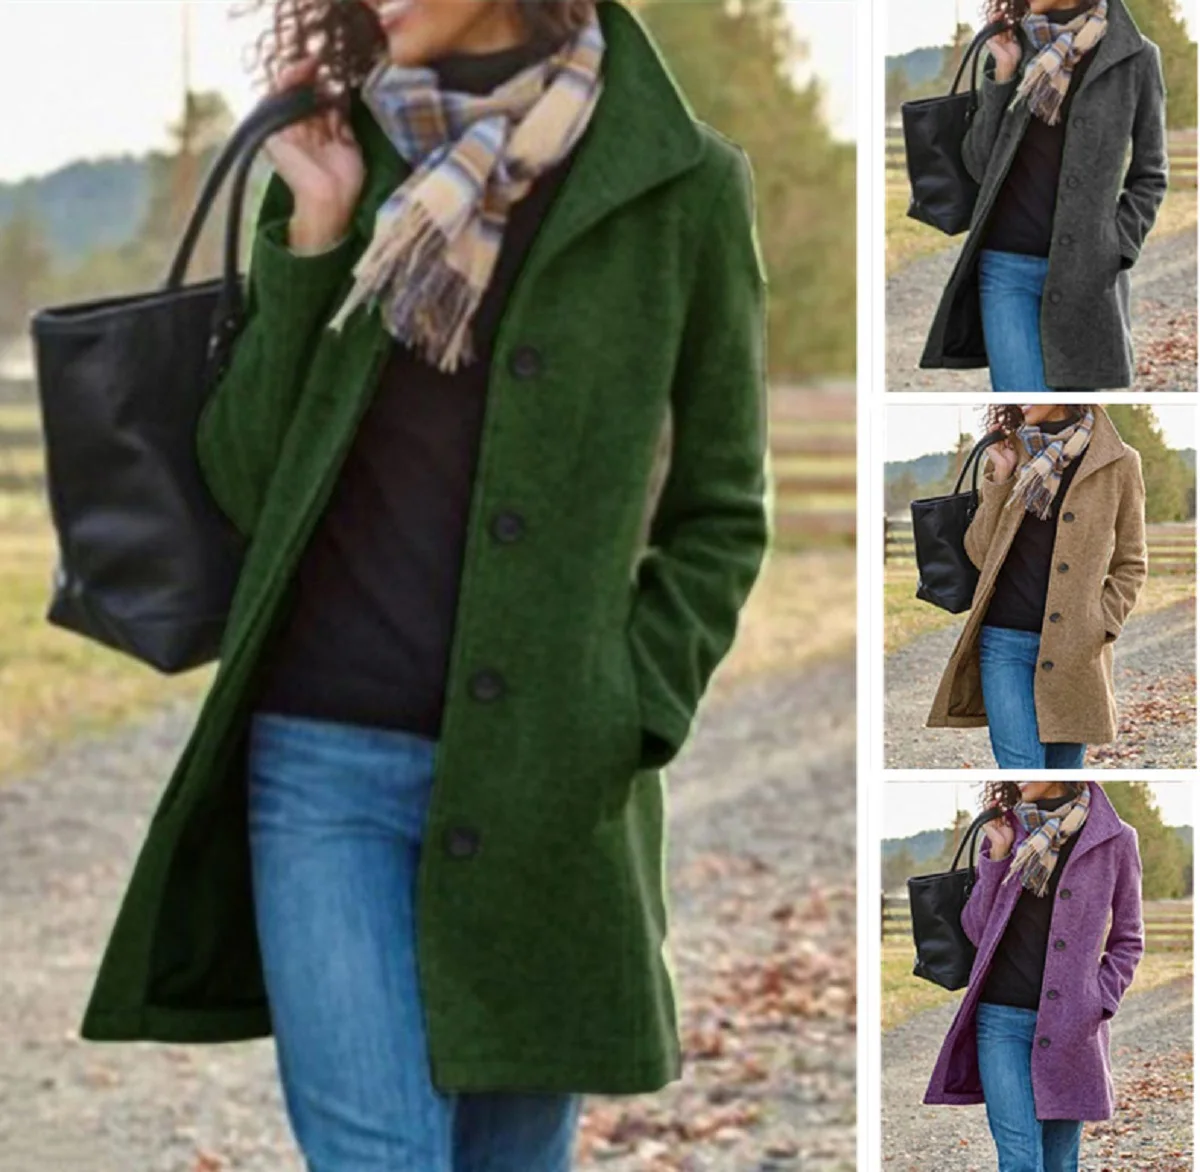 Autumn Winter Loose Maternity Thick Long Trench Coat Jacket Top Causal Women Single-Breasted Woolen Outwear Coat Capes Plus Size autumn winter knitted cardigan women jumper long sleeve slim sweater single breasted outwear jacket coat plus size xxl